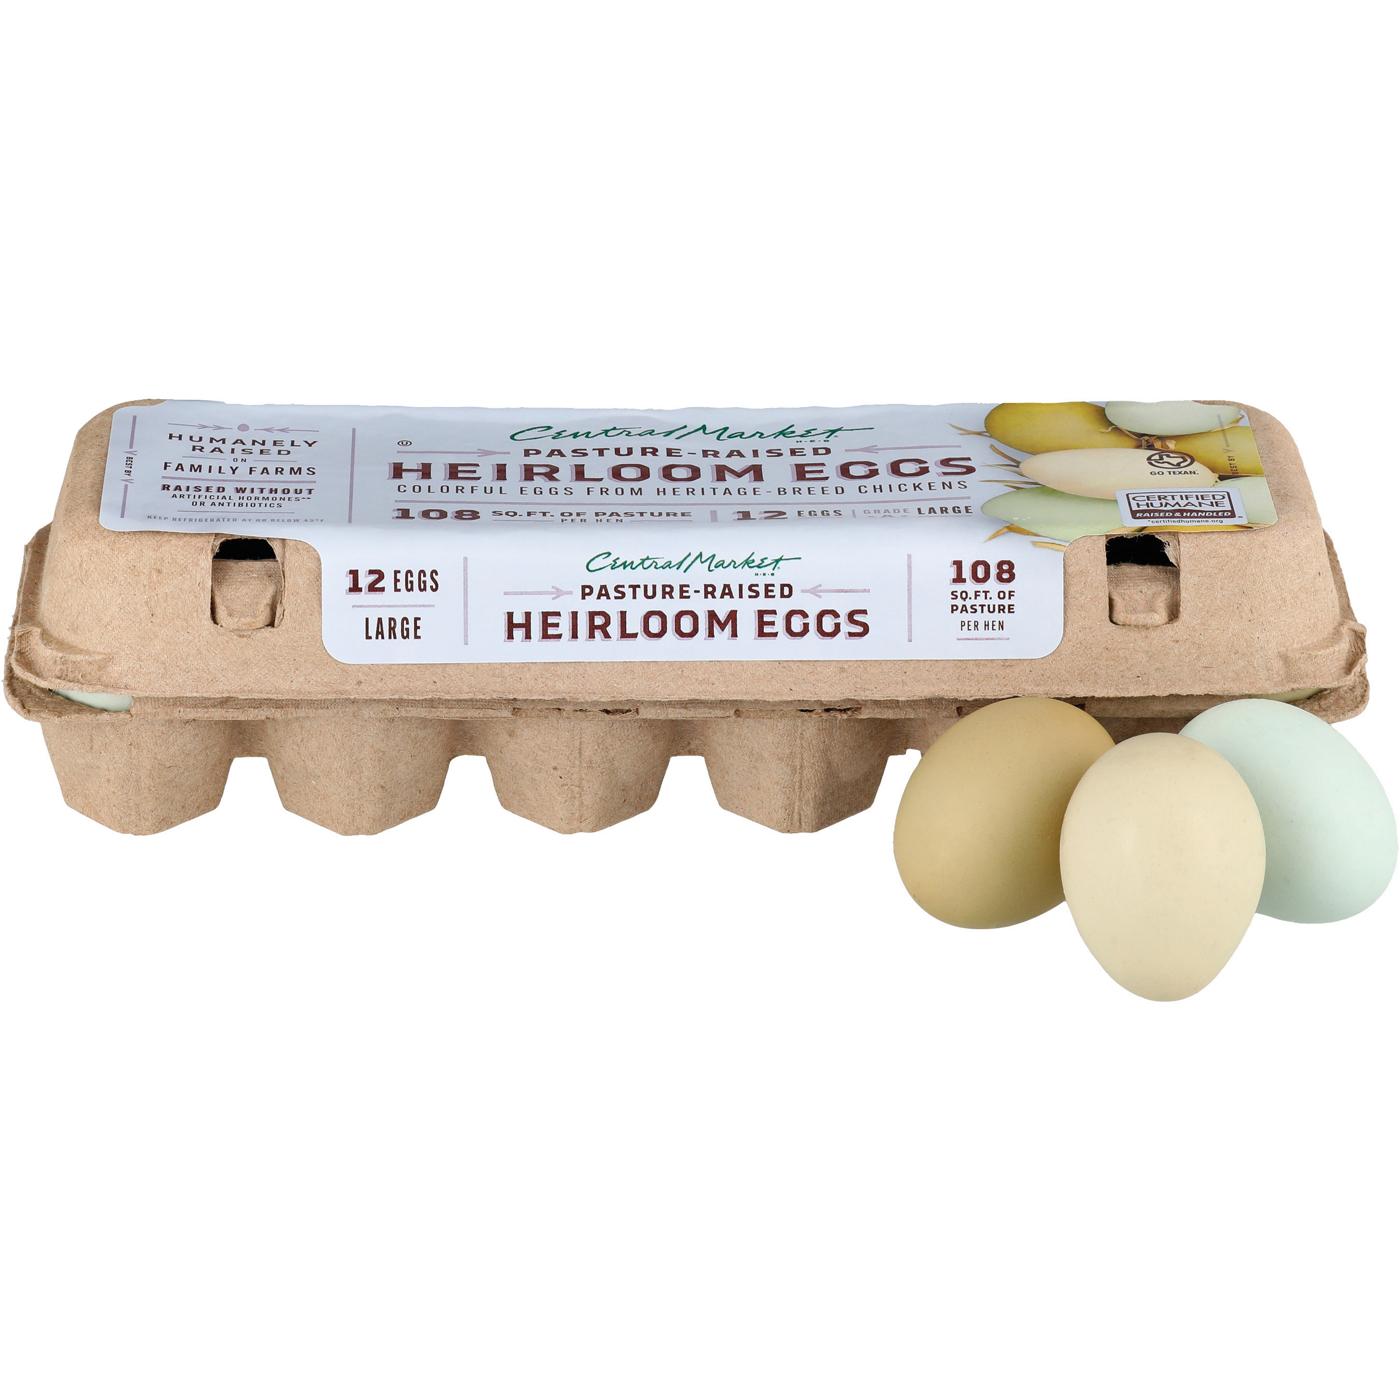 Central Market Pasture-Raised Heirloom Colorful Large Grade A Eggs; image 1 of 3